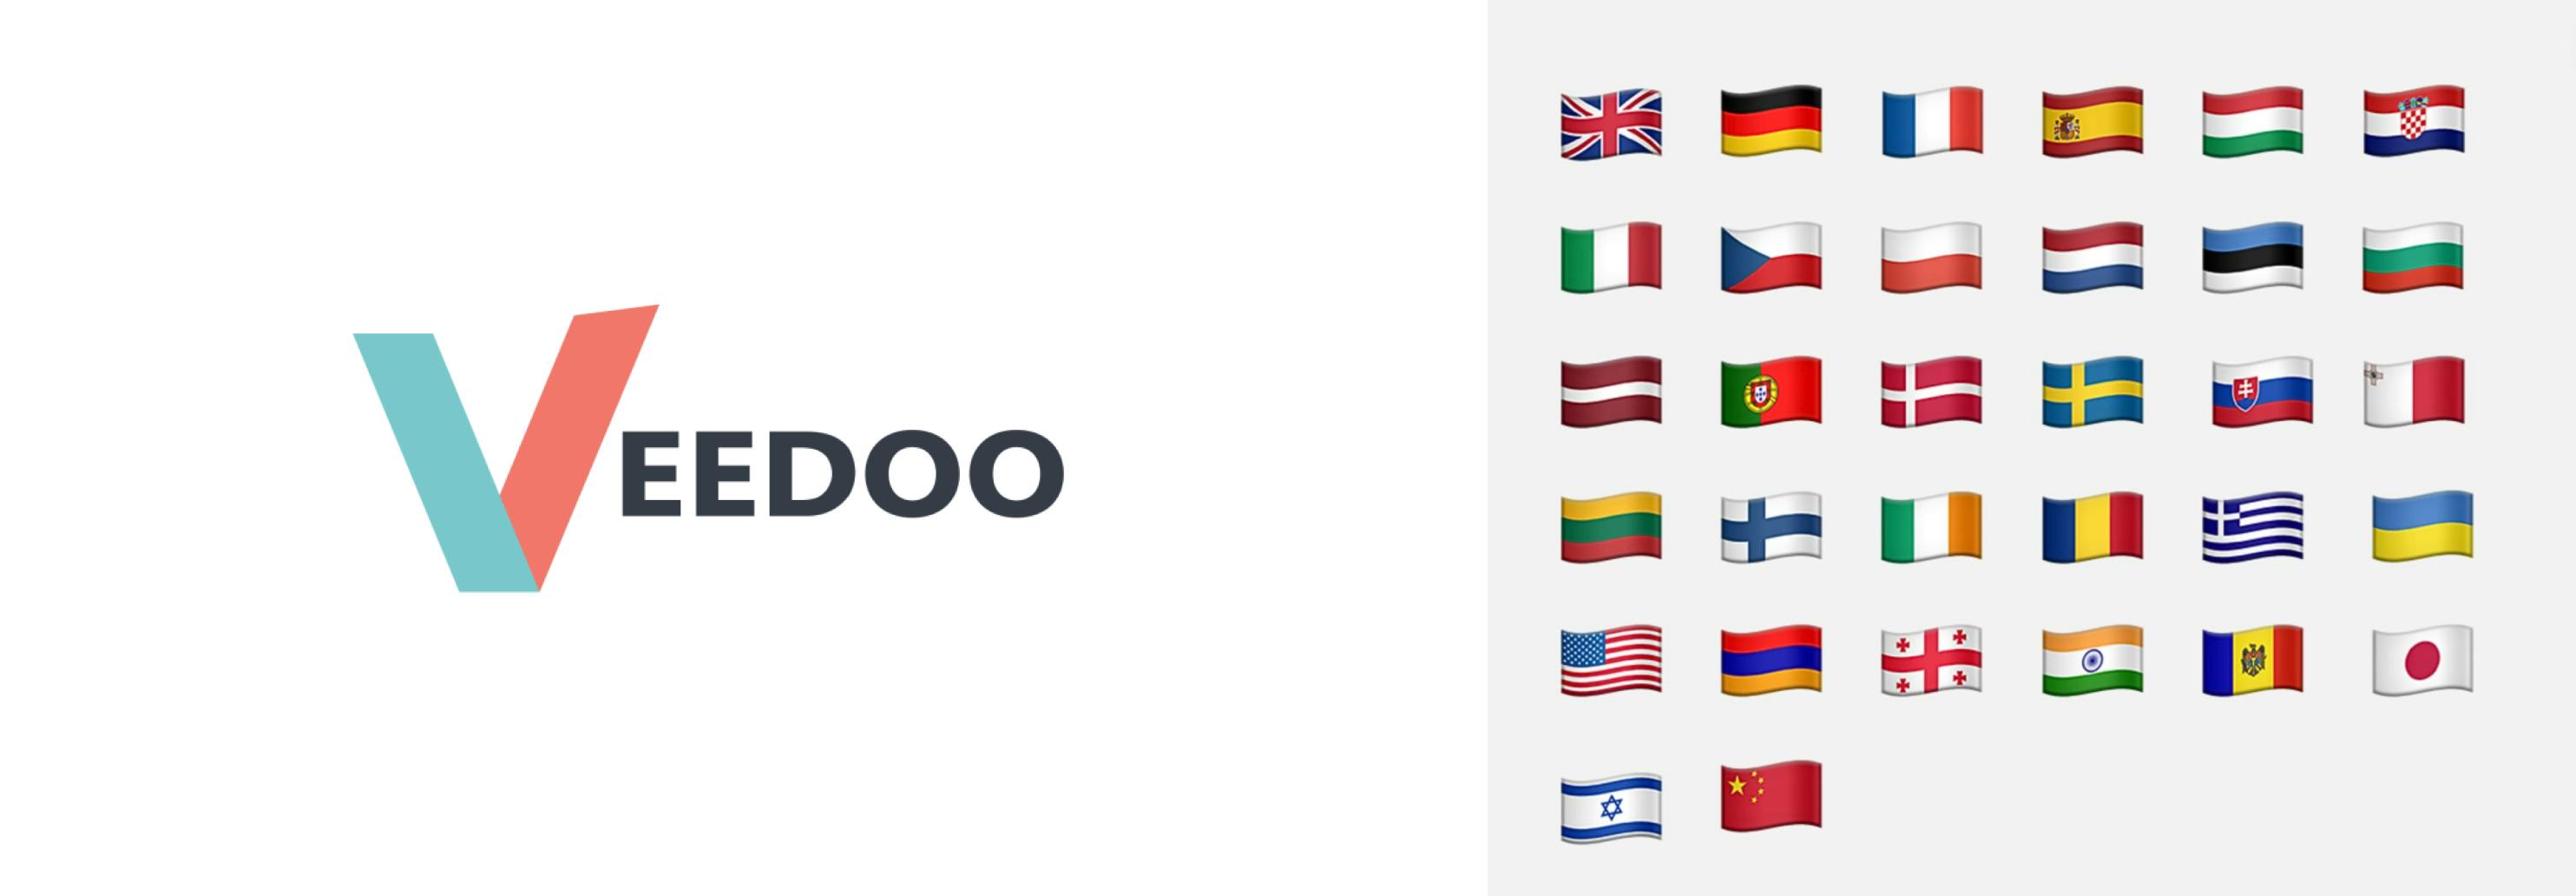 llustration folded into two parts - The first part shows the VEEDOO logo, the second part shows 32 country flags